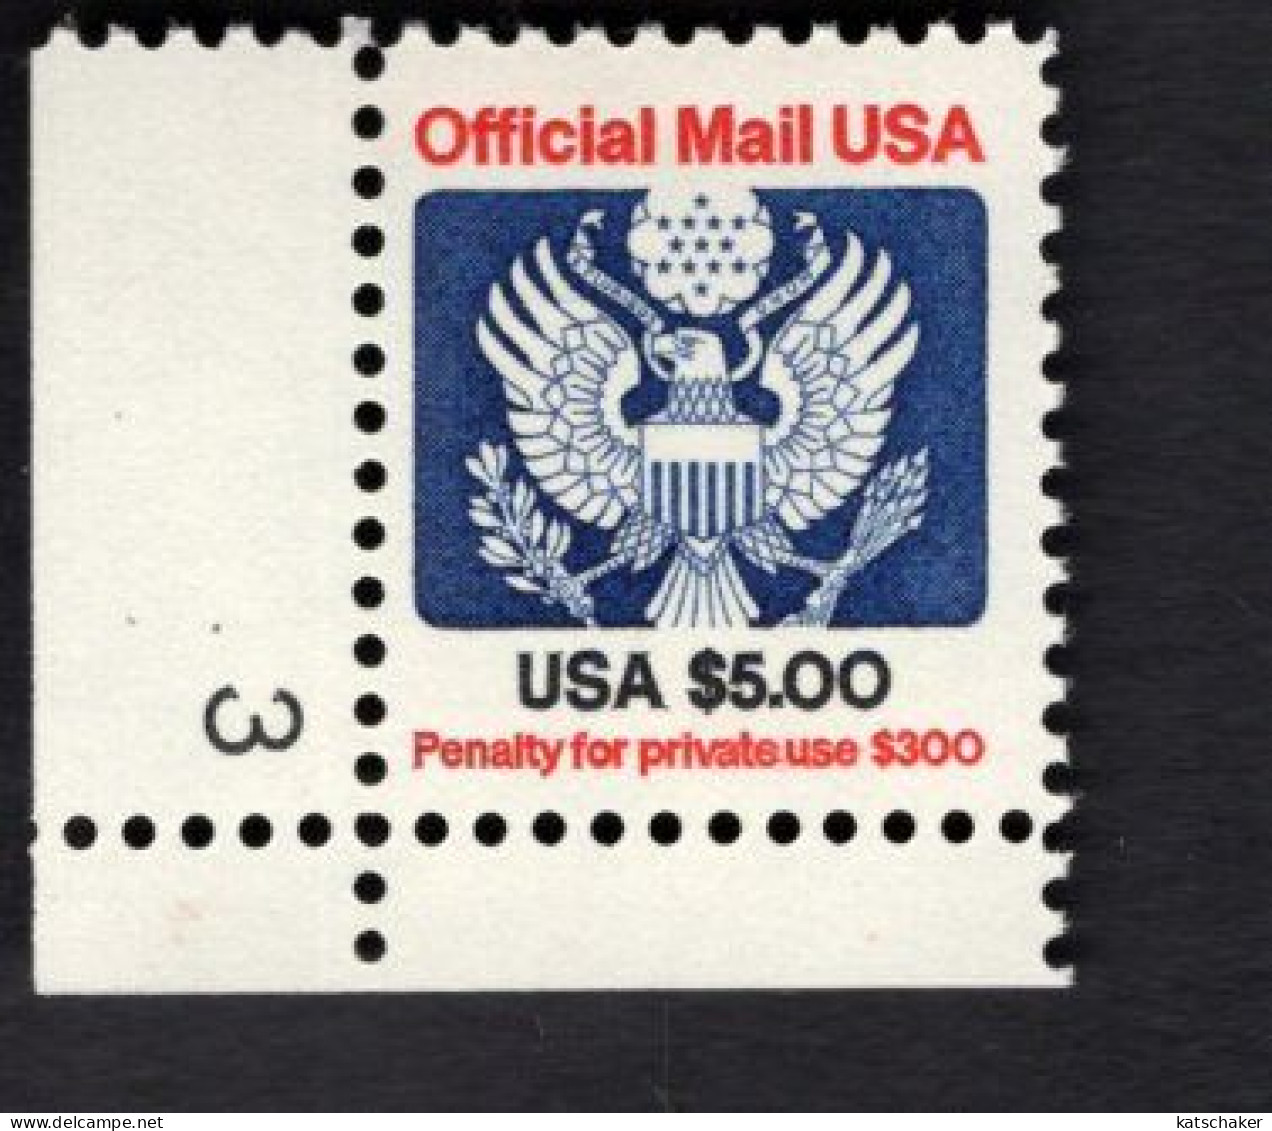 2008964903 1983 (XX) SCOTT O133 POSTFRIS MINT NEVER HINGED  Eagle And Shield Bird Vogel OFFICIAL MAIL PLATE 3 - Service